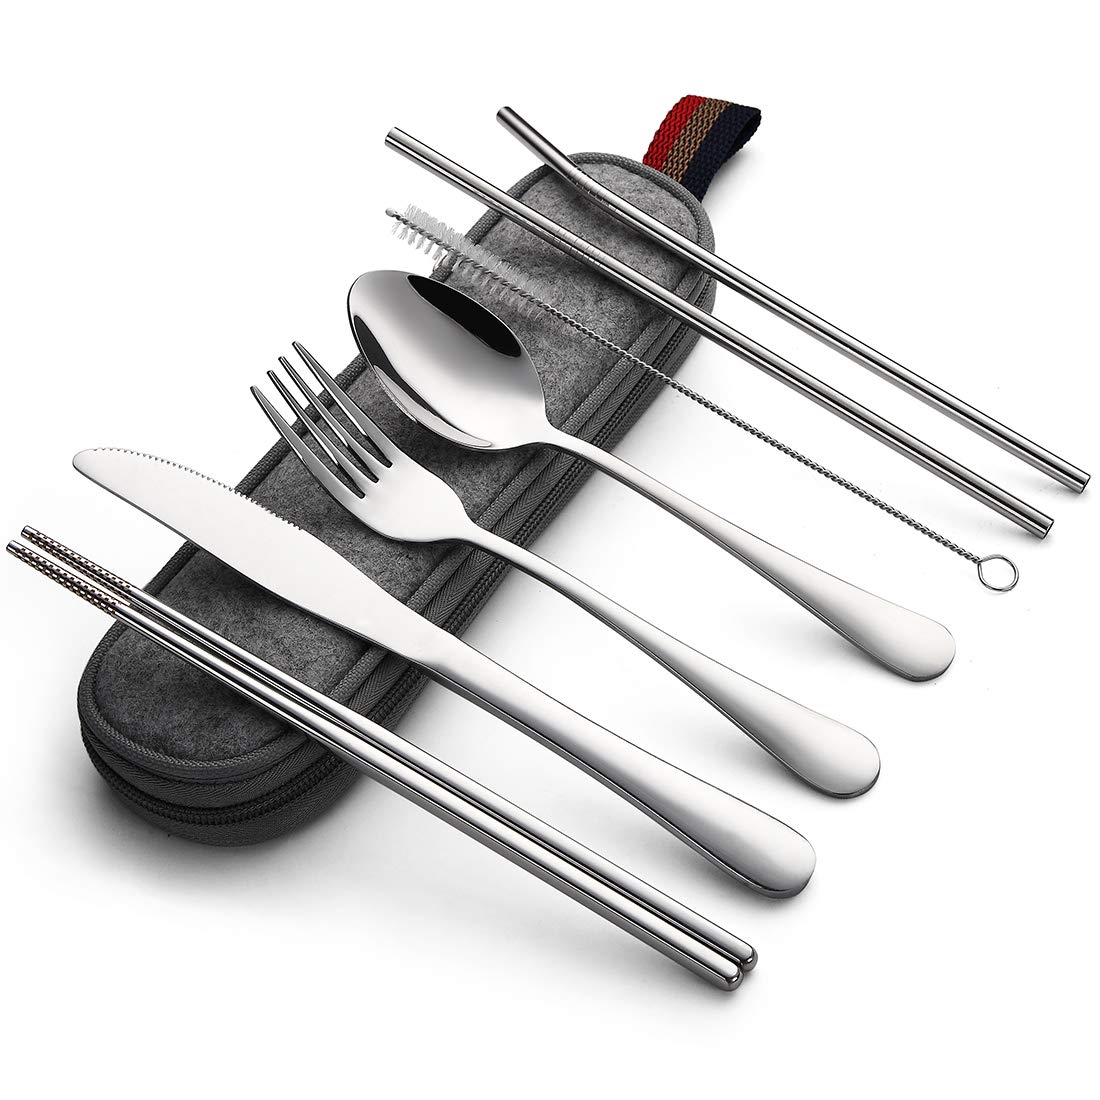 Holiday Food Gifts - Cutlery Set